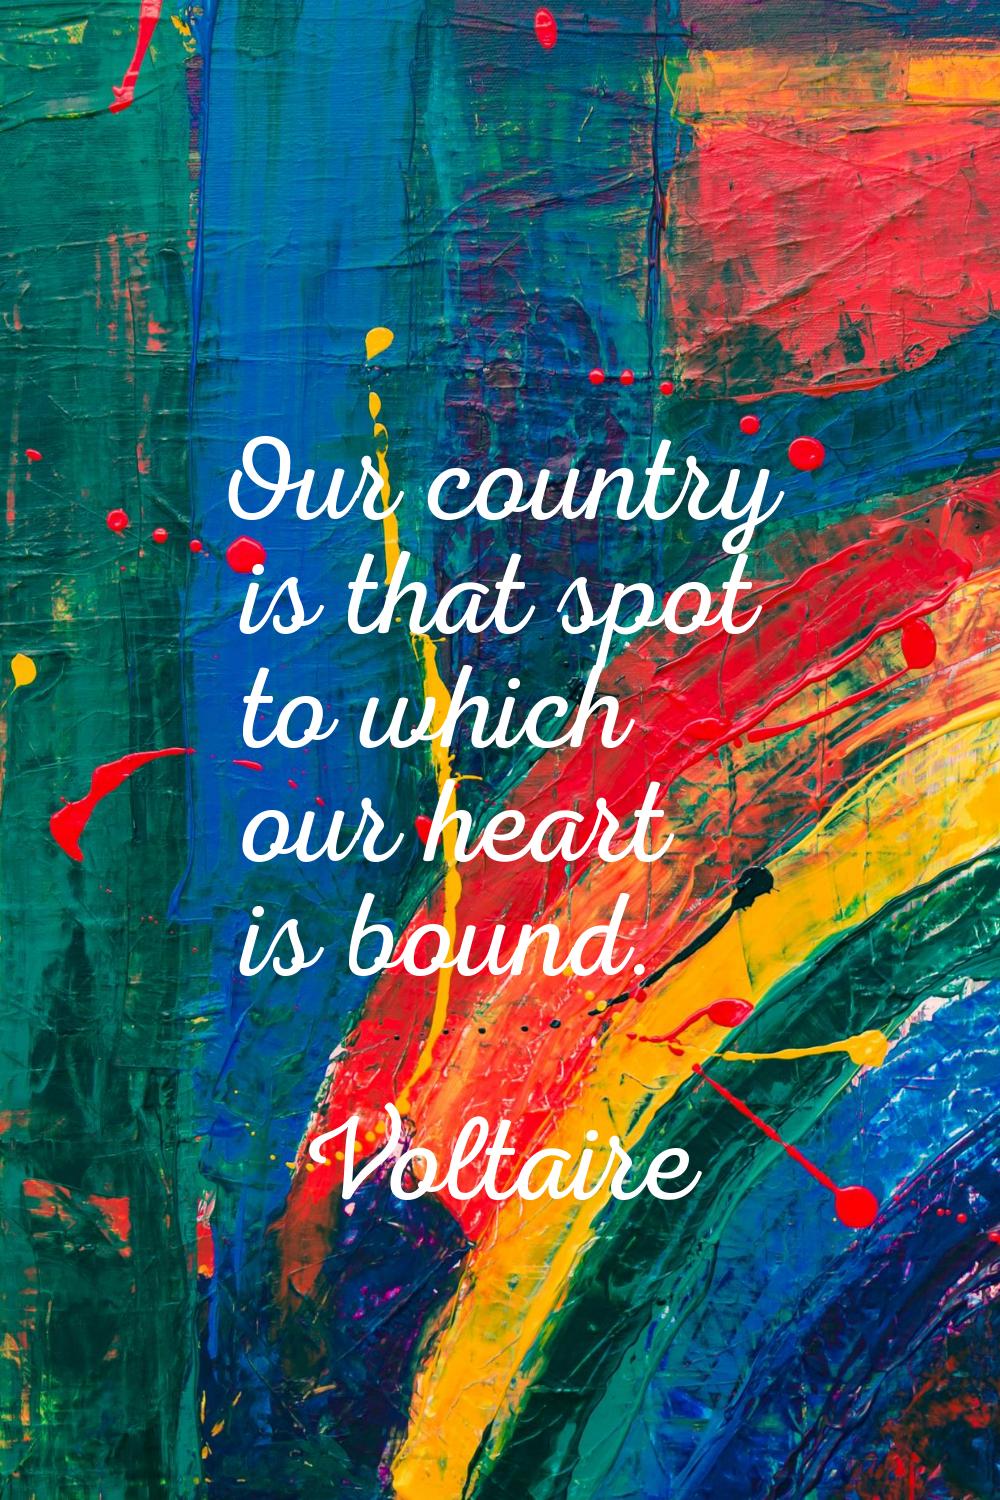 Our country is that spot to which our heart is bound.